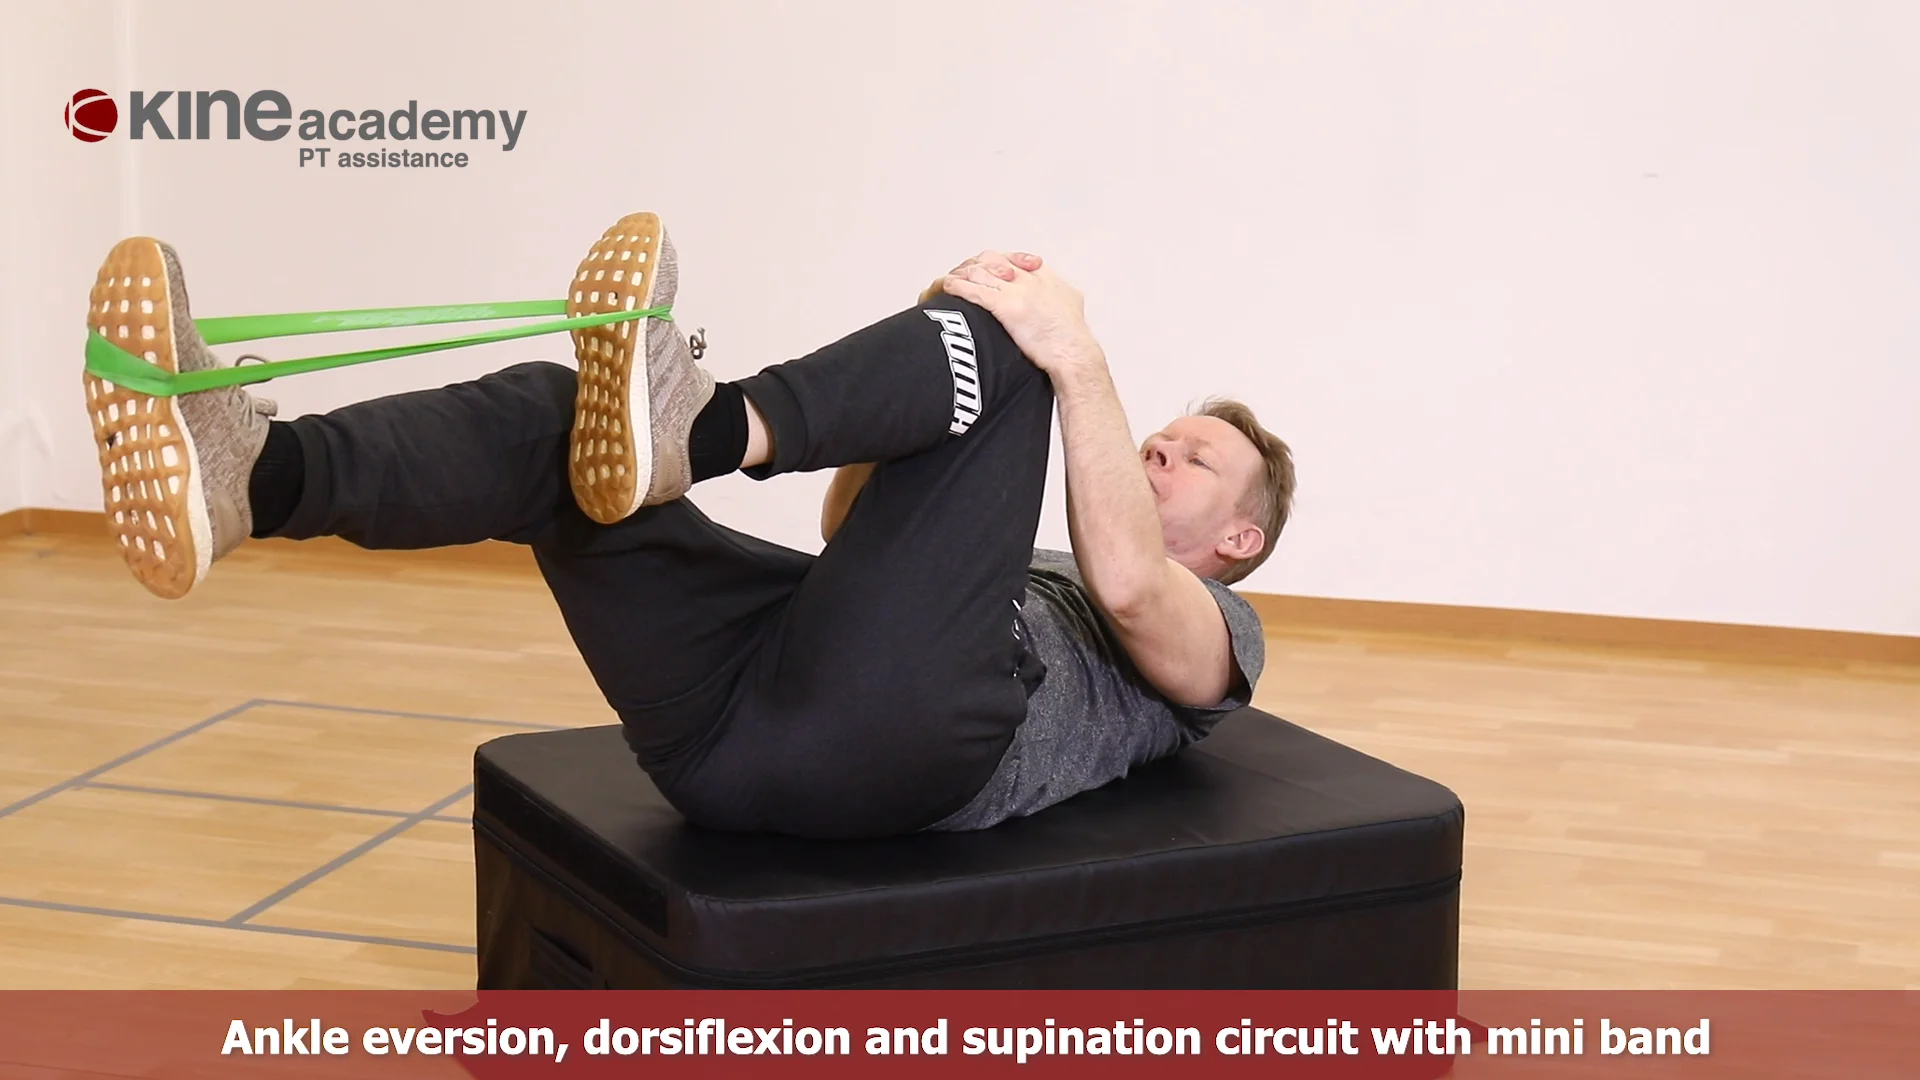 Ankle eversion, dorsiflexion and supination circuit with mini band